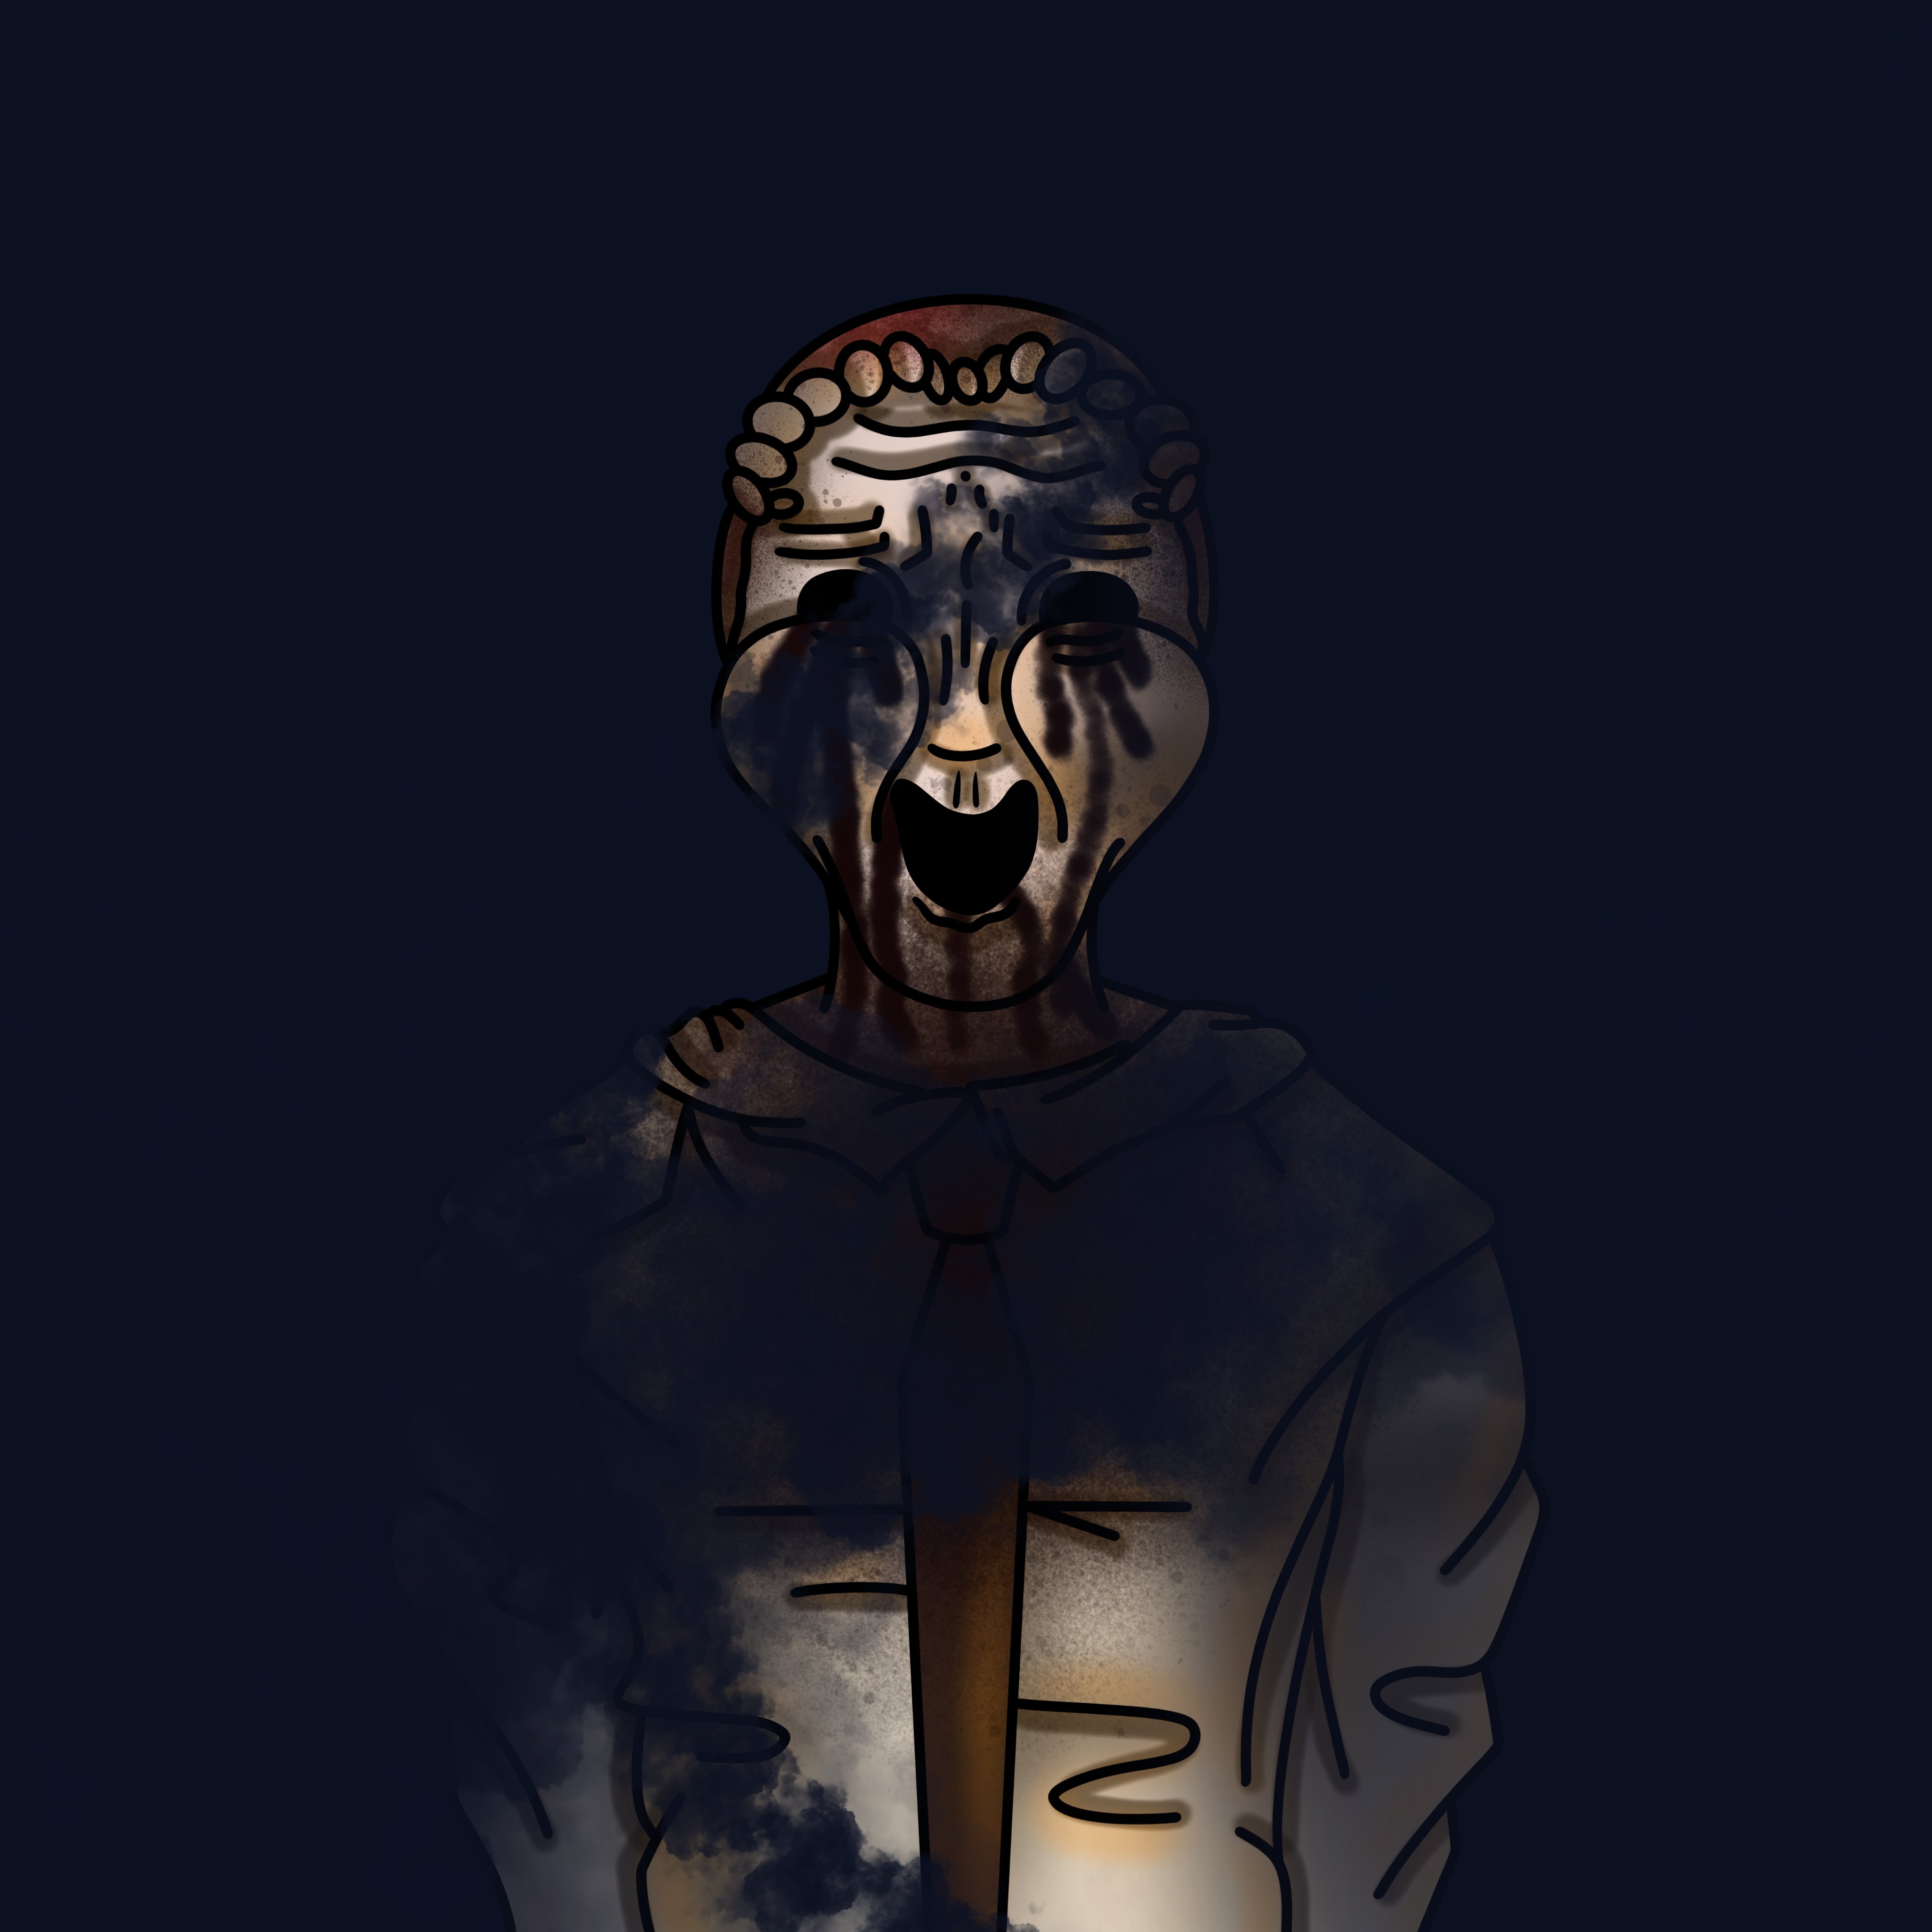 SCP 035 The Possessive Mask by charcoalman on DeviantArt